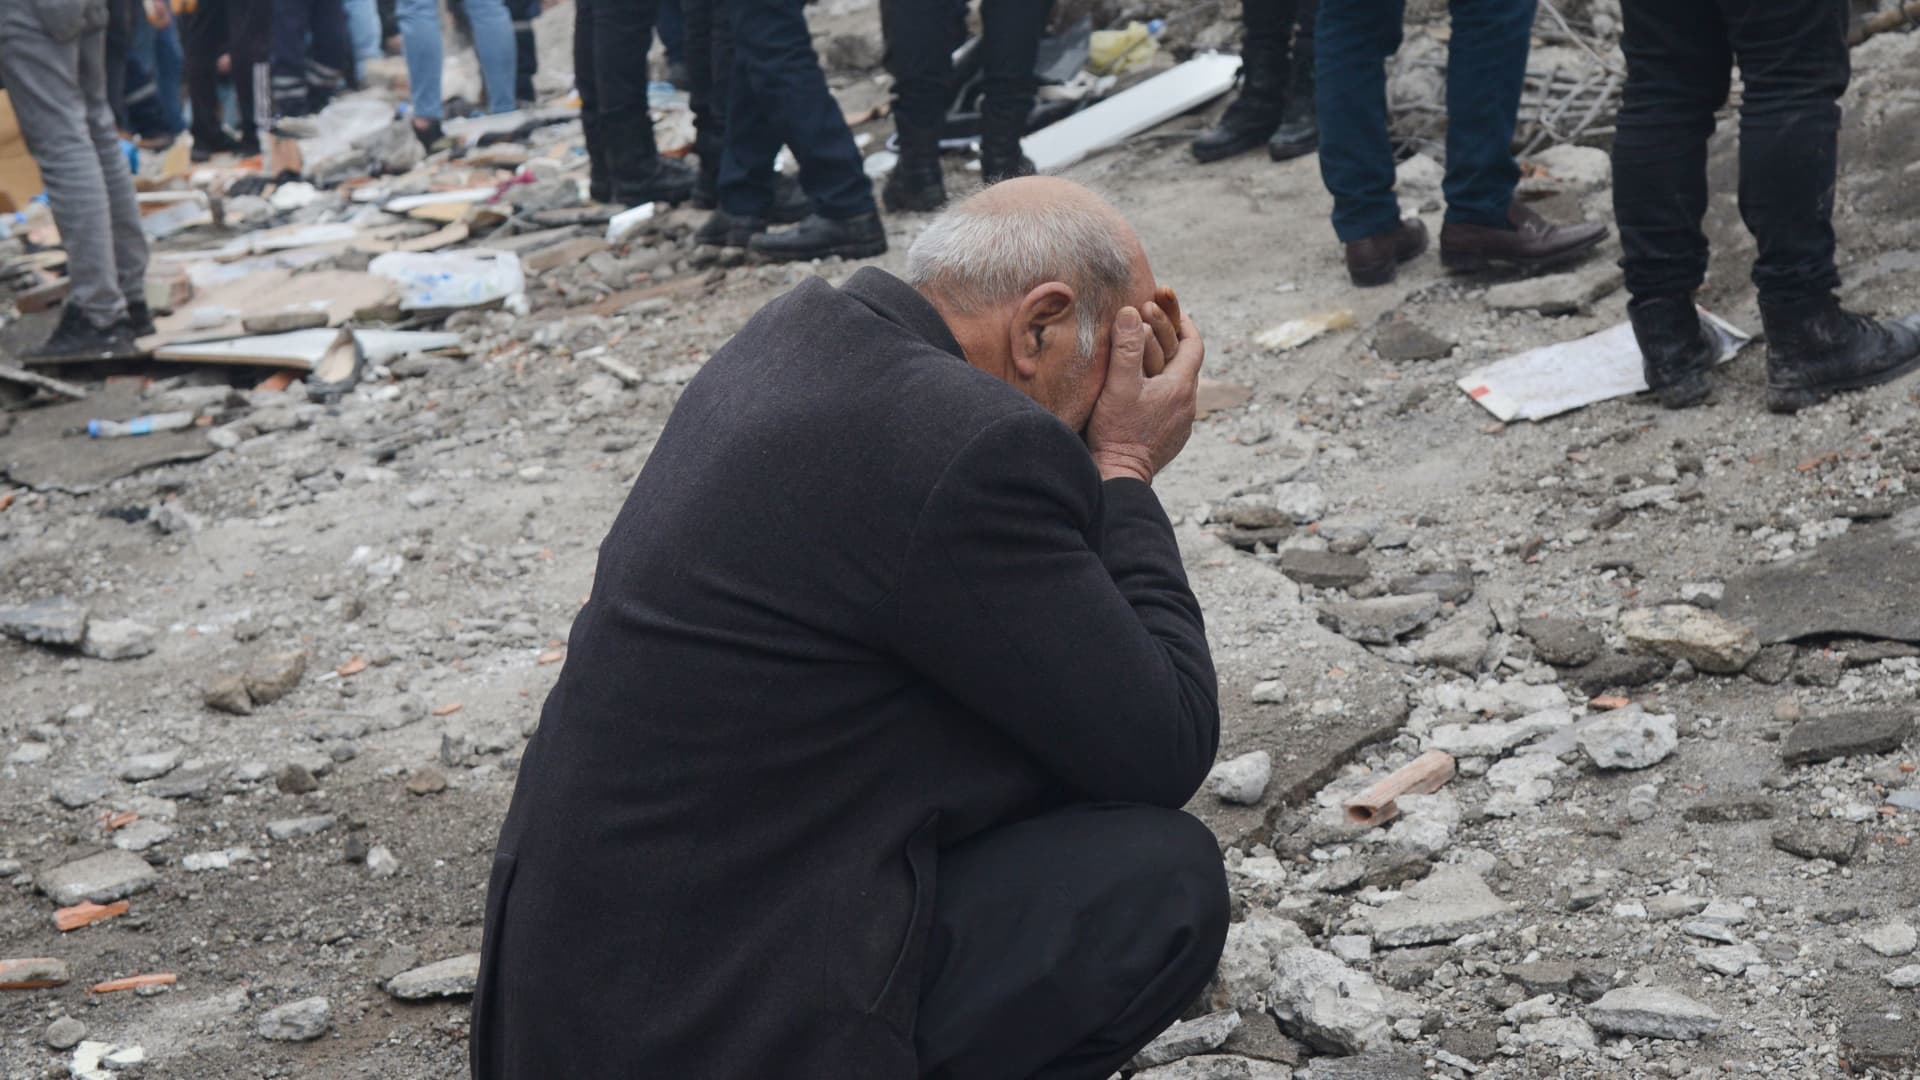 A man reacts as people search for survivors through the rubble in Diyarbakir, on February 6, 2023, after a 7.8-magnitude earthquake struck the country's south-east.